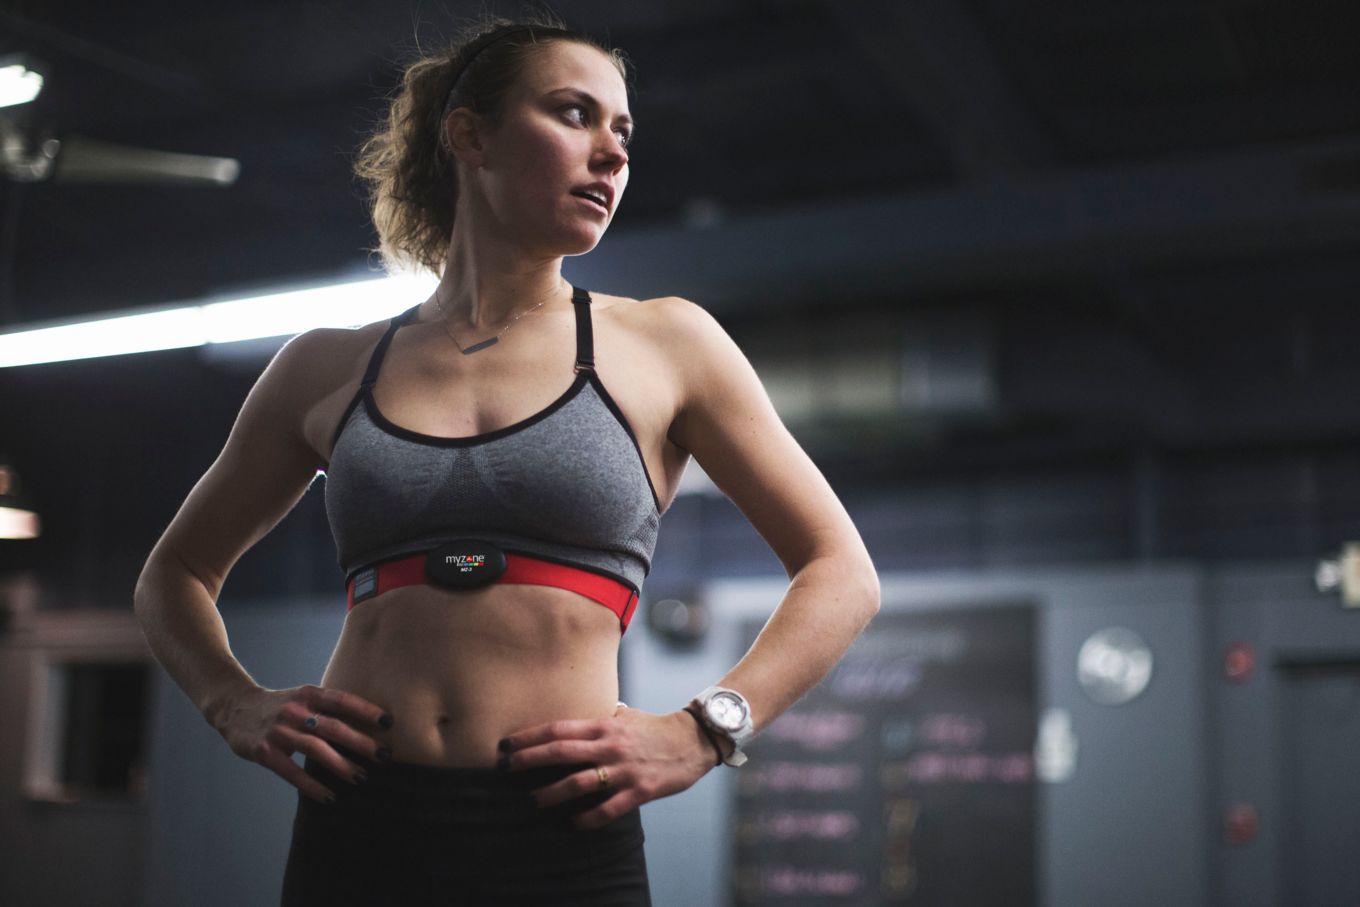 Image shows a women in gym gear using the Myzone fitness belt.